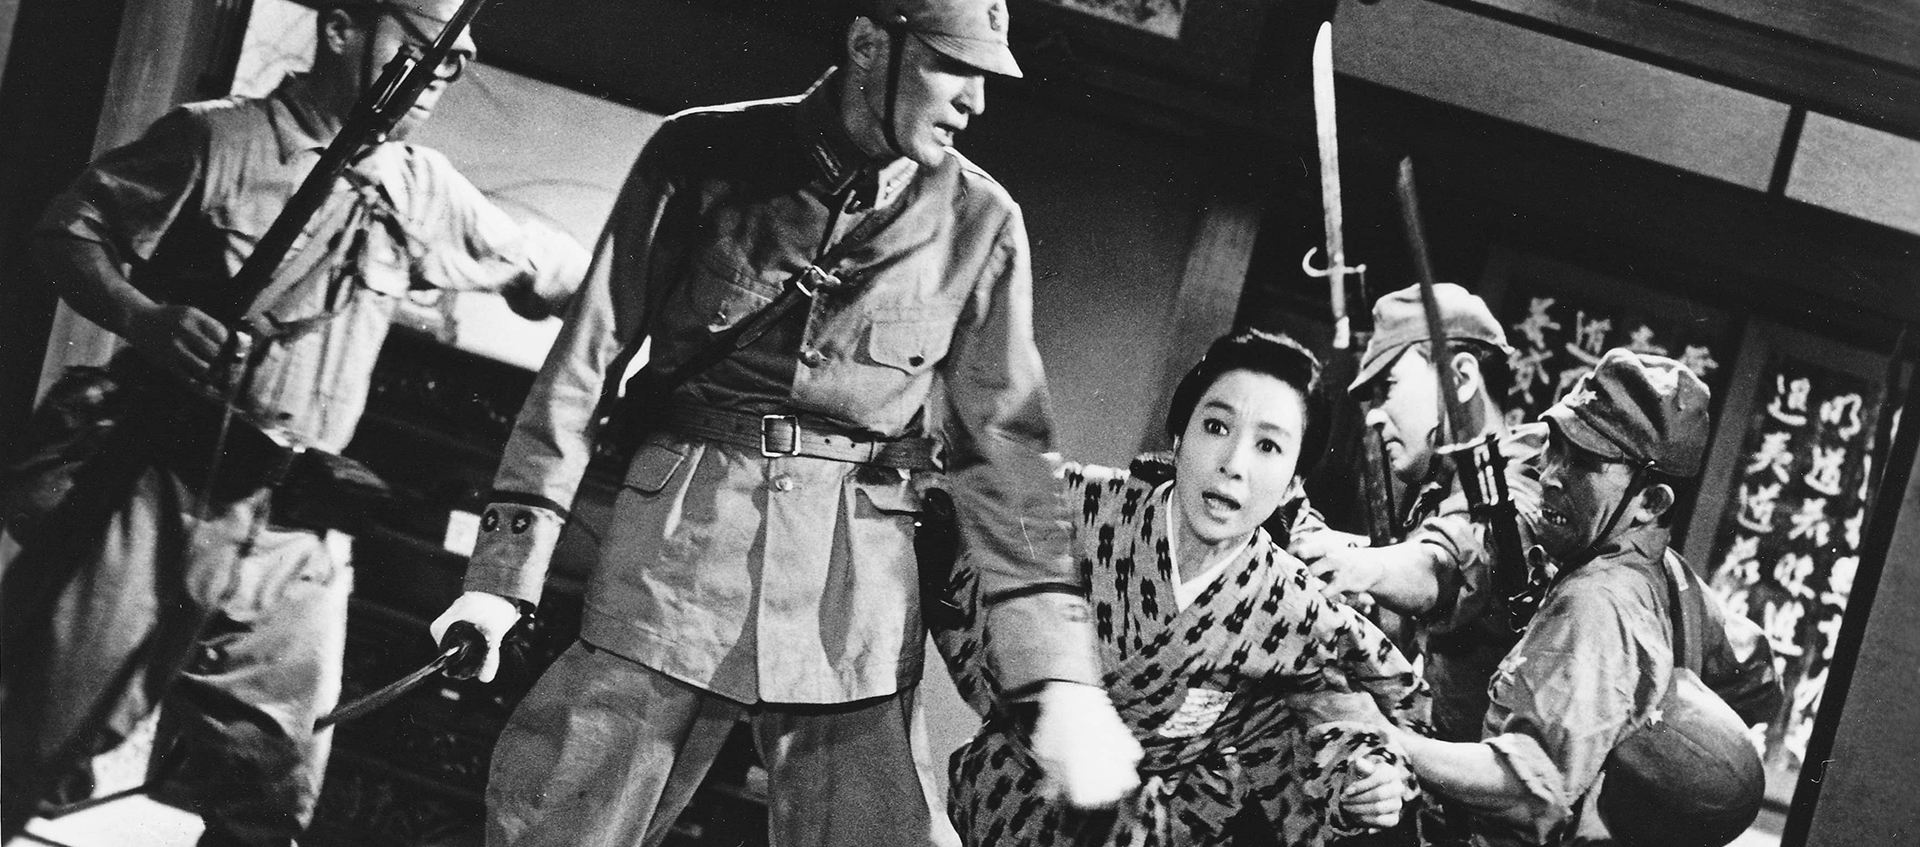 Black-and-white still of a person in a patterned kimono who is trying to flee from four soldiers with weapons.